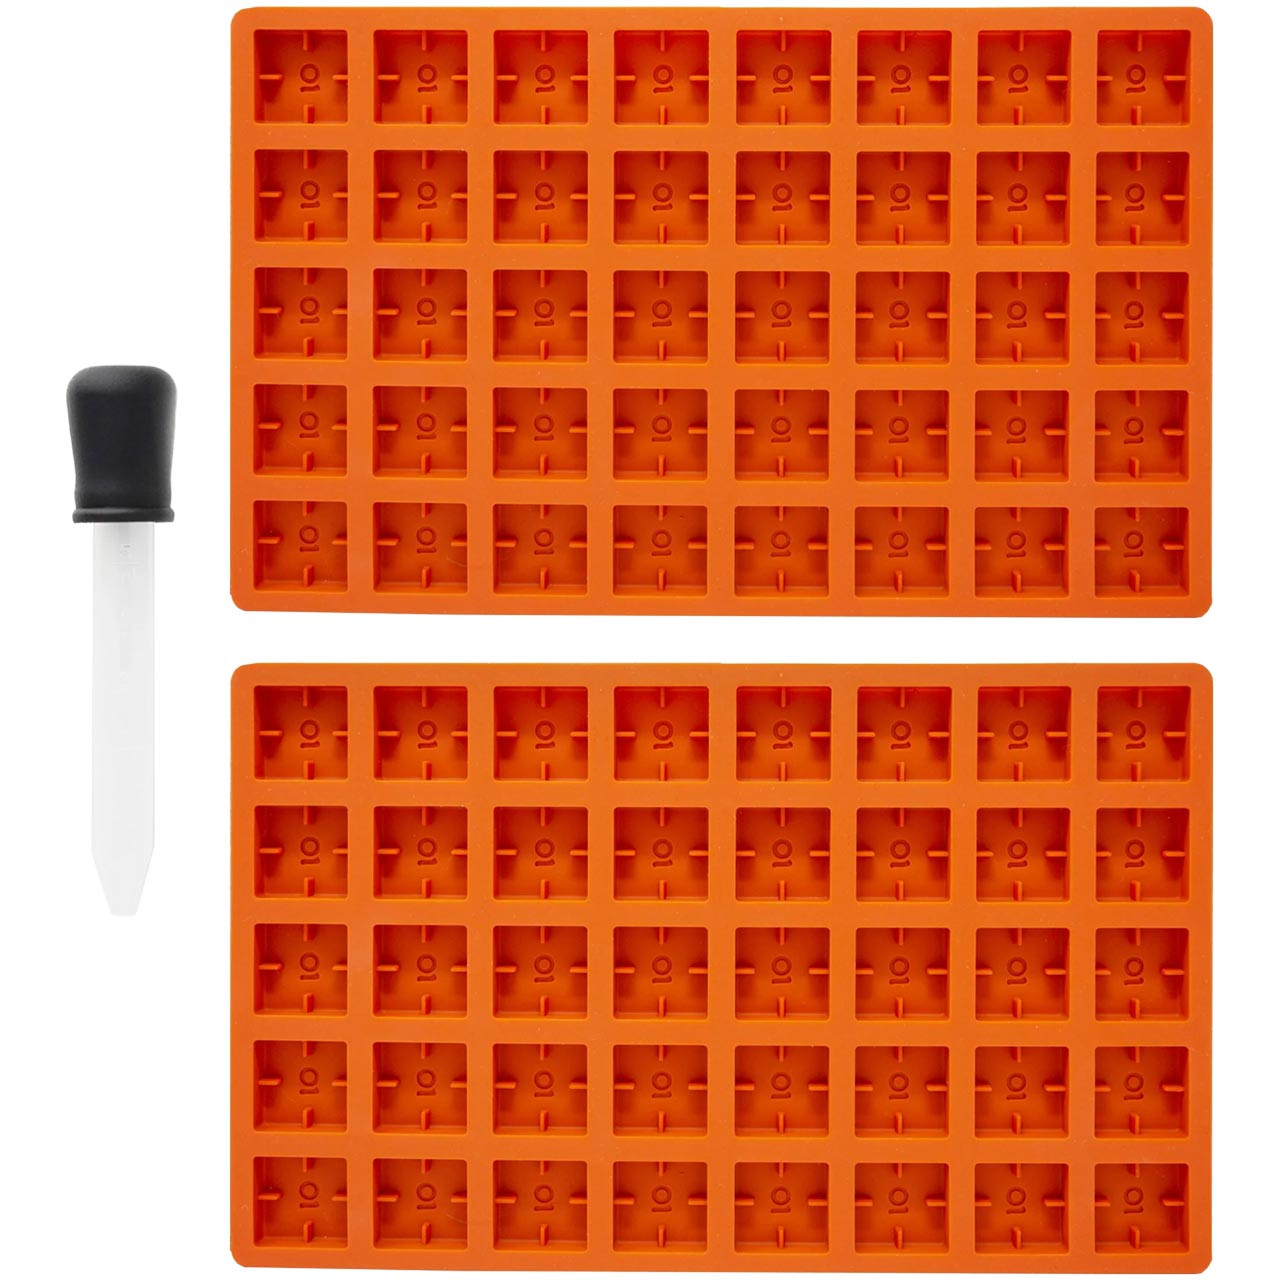 https://cdn11.bigcommerce.com/s-1n8r405nxd/images/stencil/1280x1280/products/10642/22737/22307-F1-Ongrok-Silicone-Square-Gummy-Trays-Scored-Dishwasher-Dropper-Top__79896.1665433534.jpg?c=2